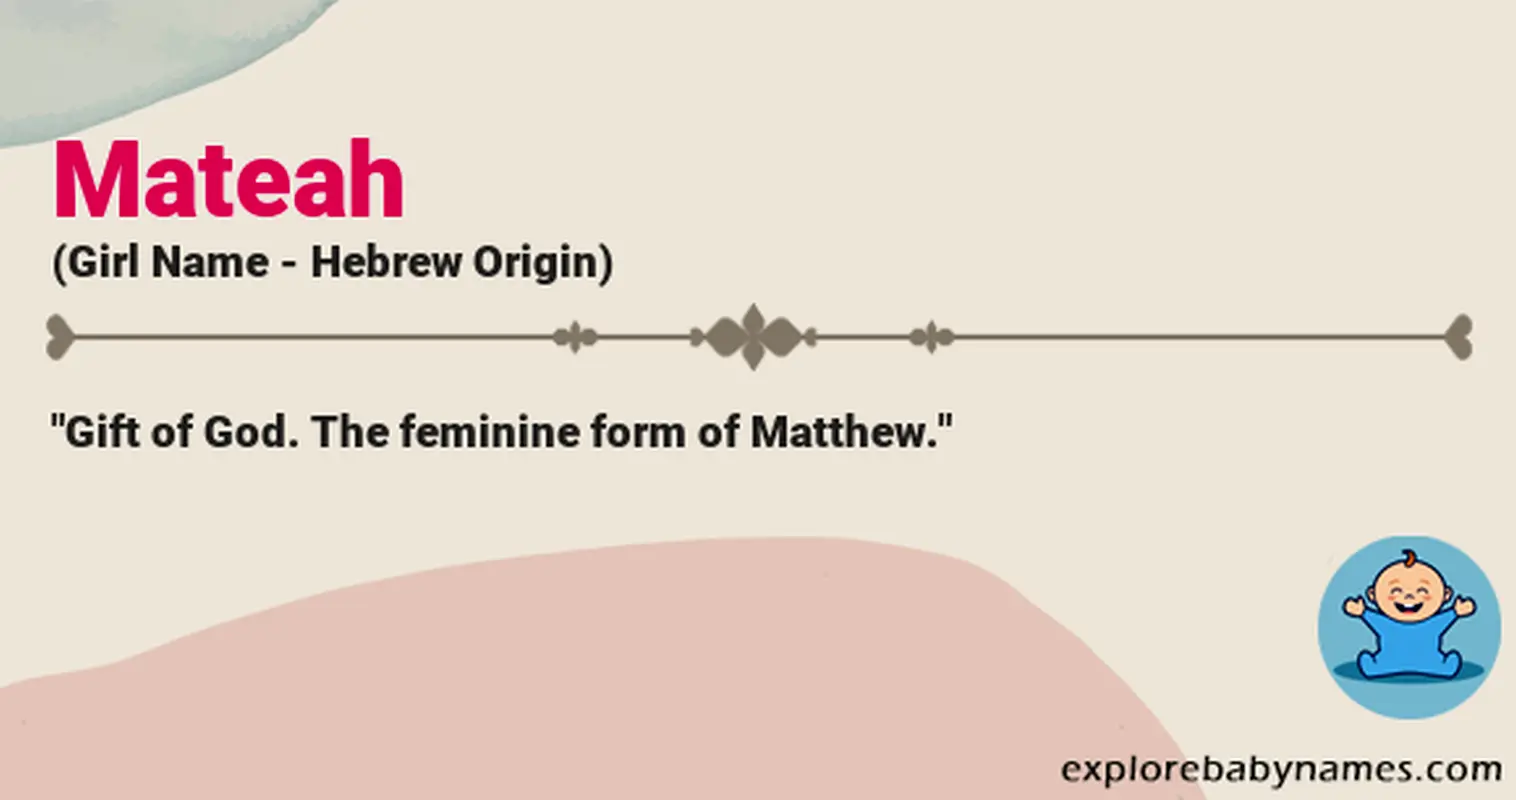 Meaning of Mateah